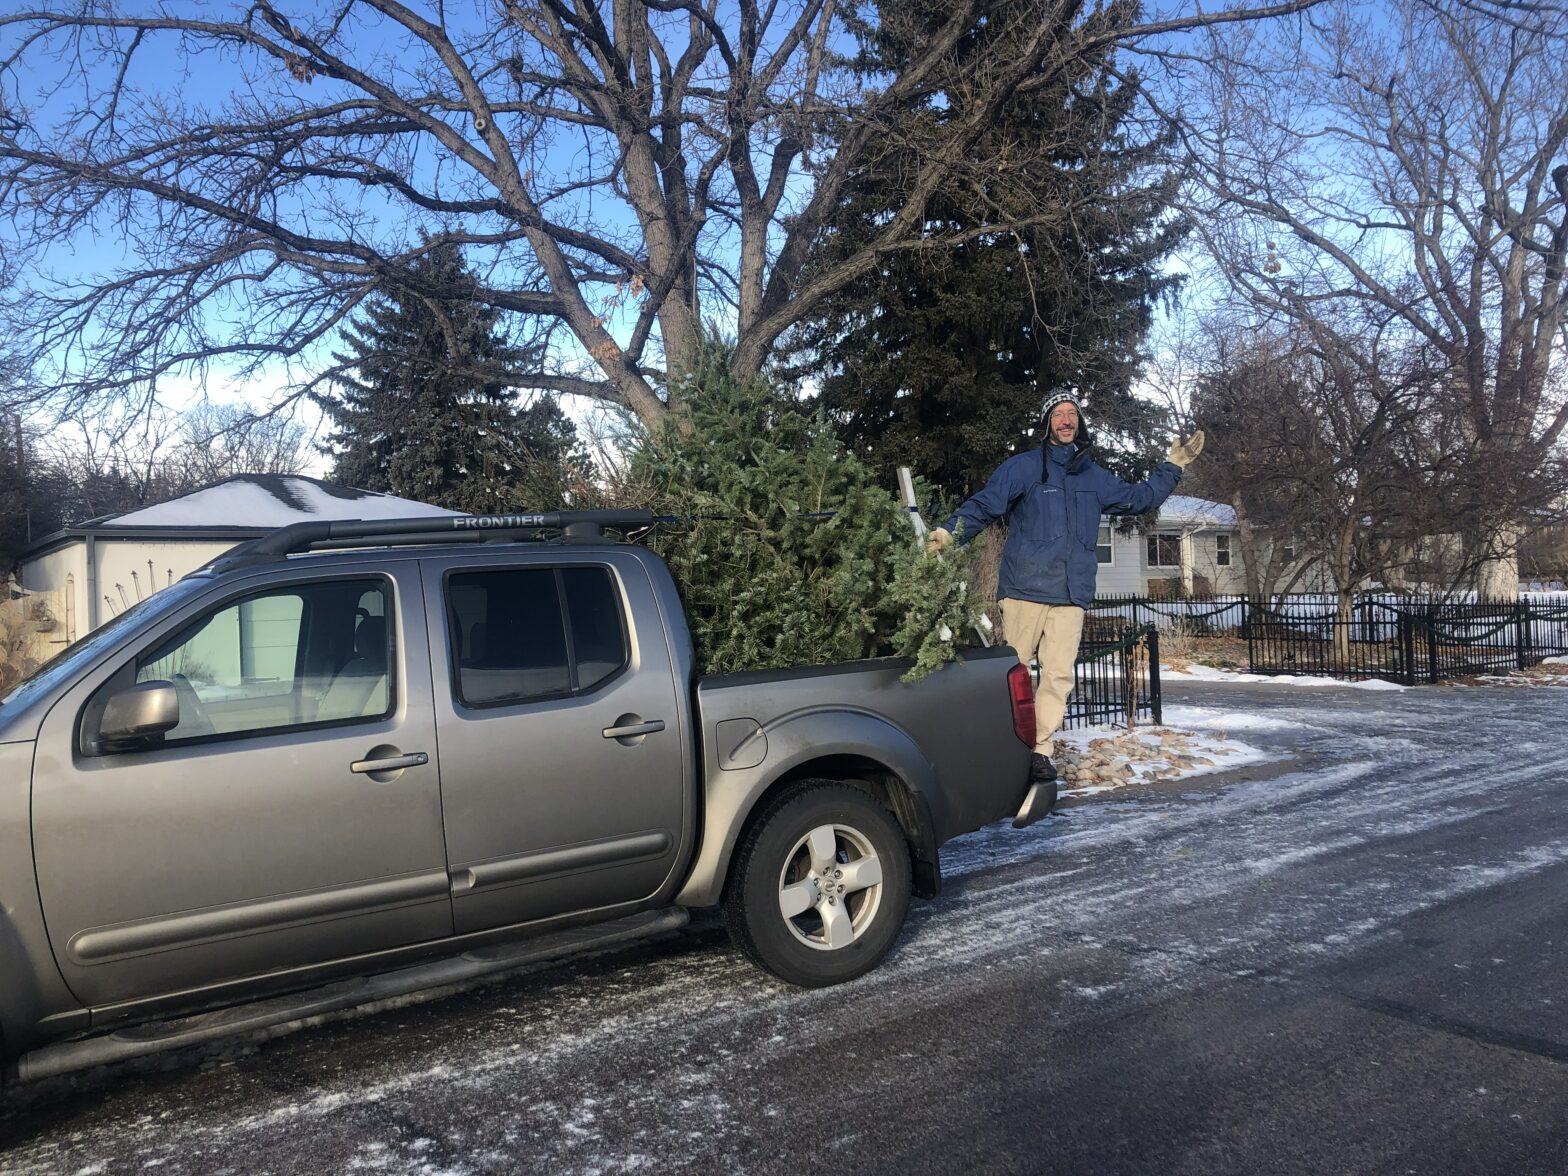 Adam riding on the back of a pickup truck full of Christmas trees.